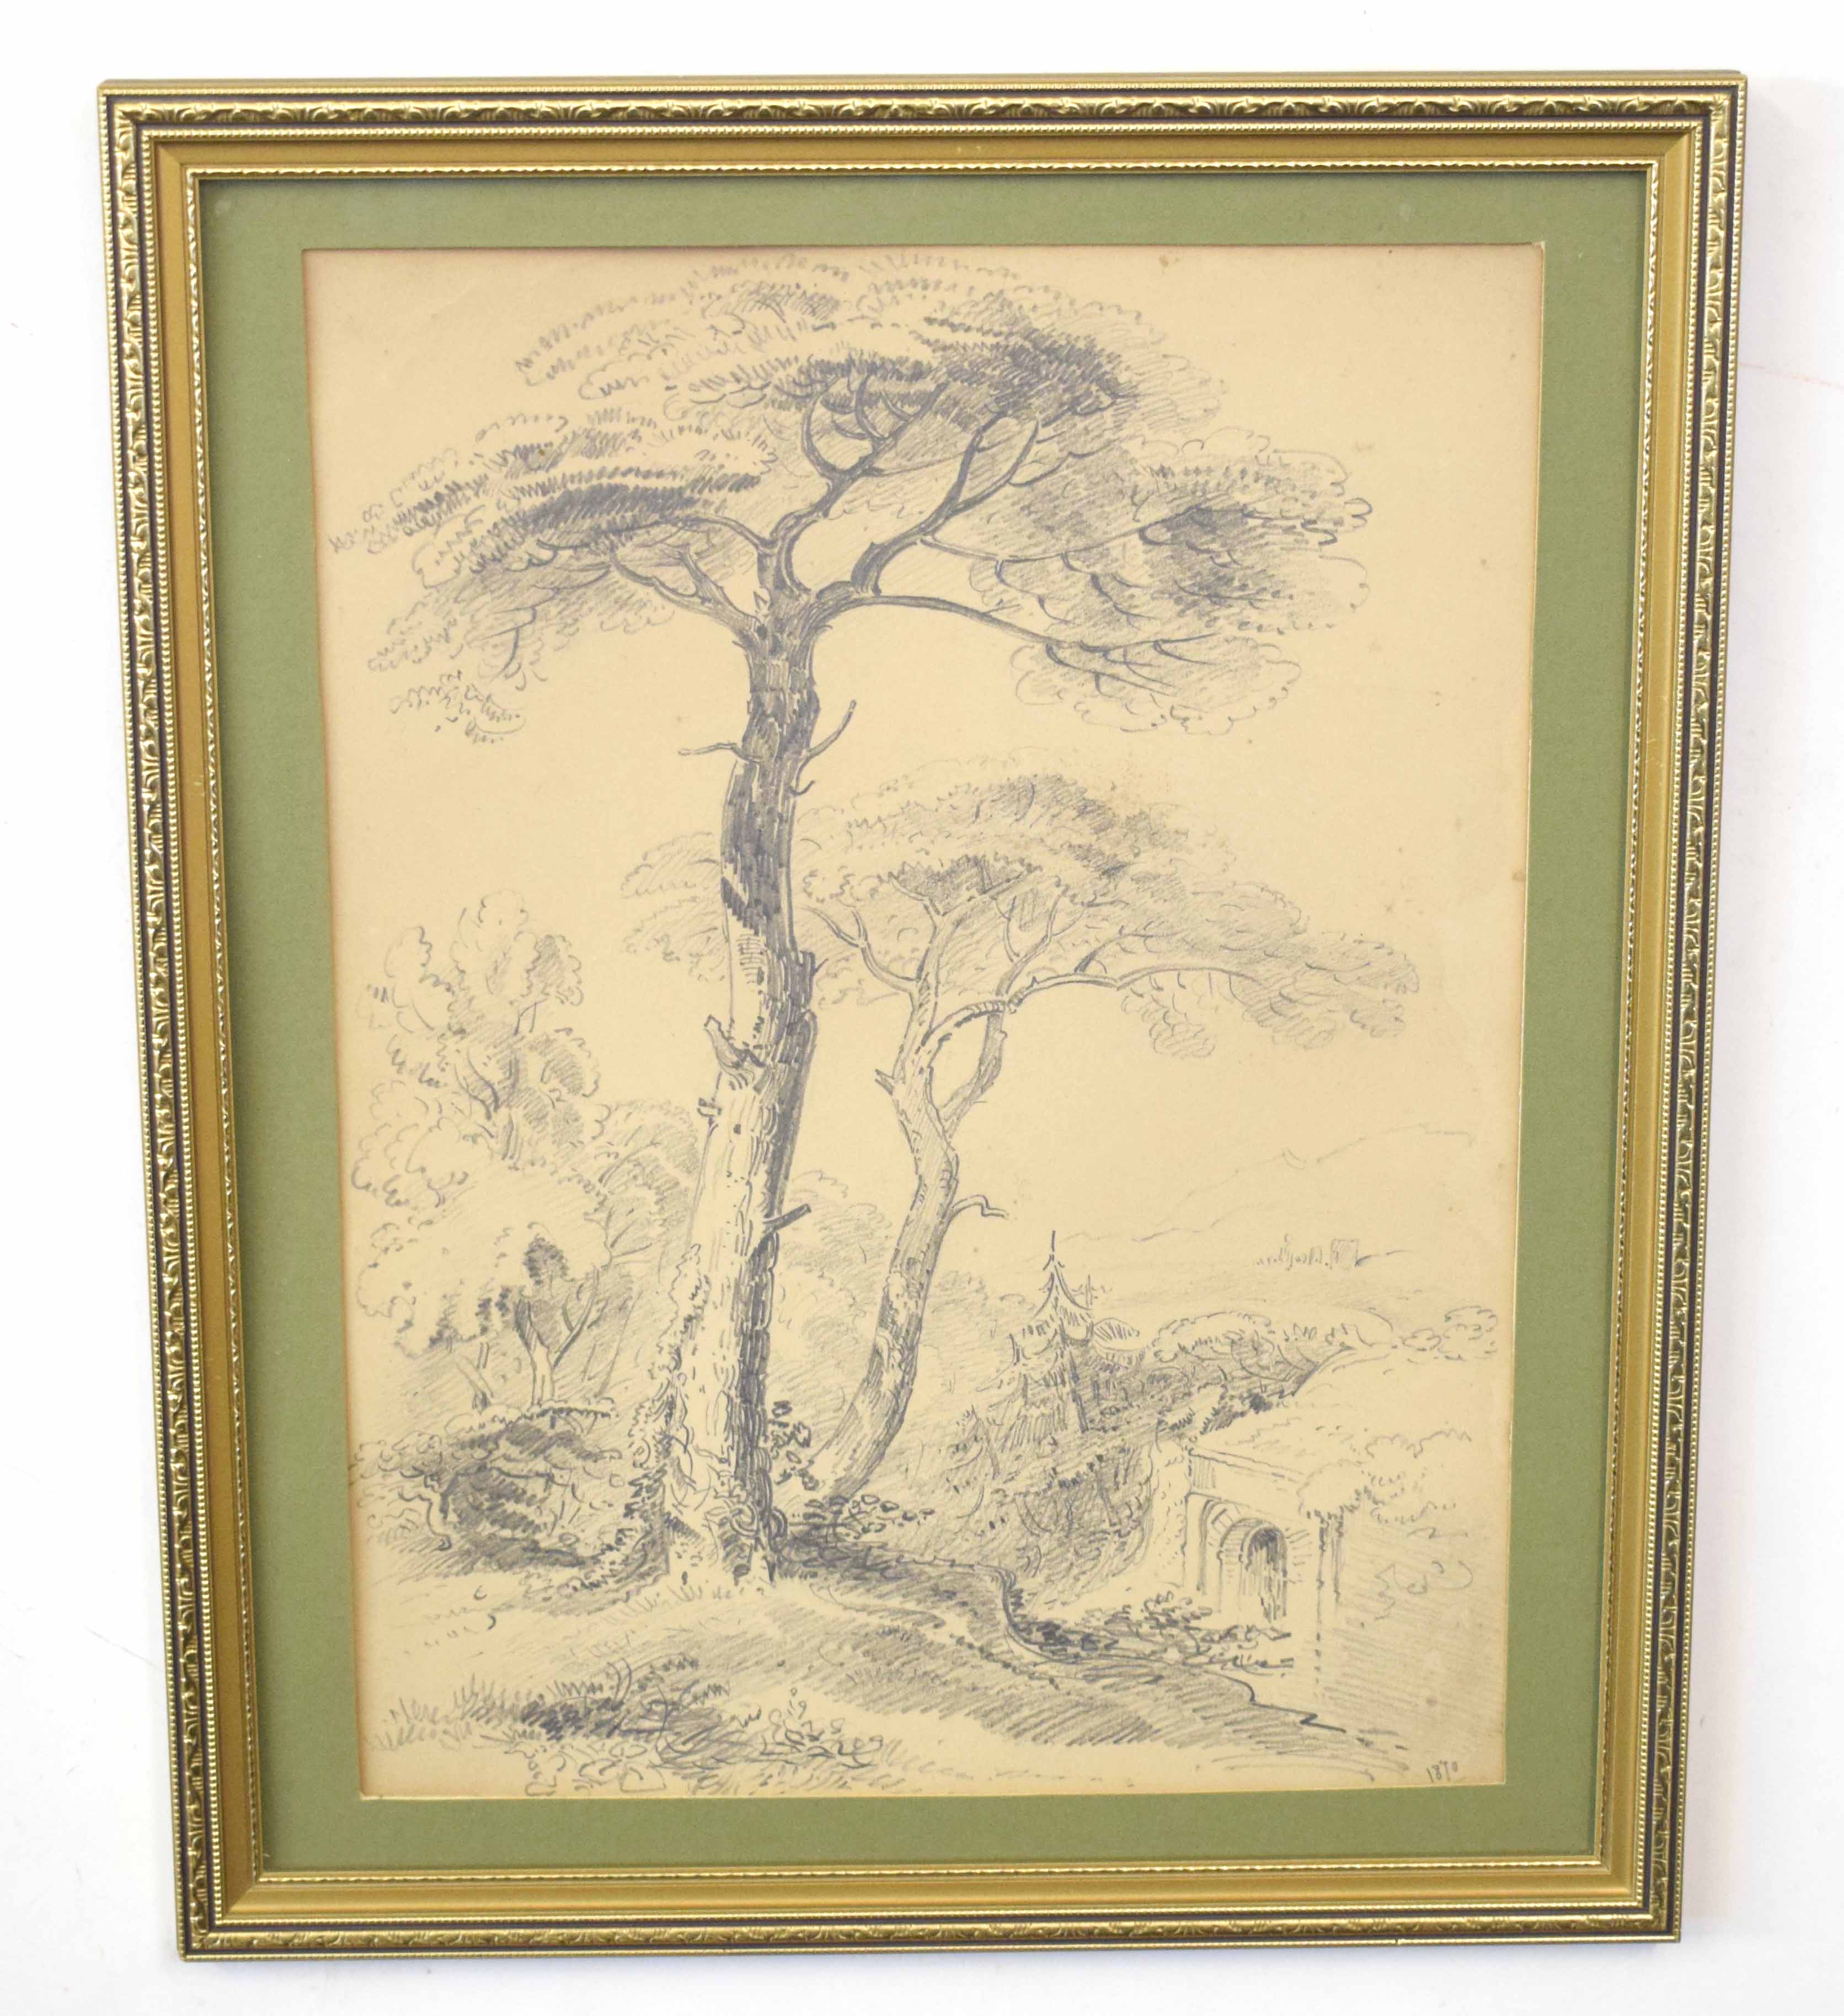 19th century English School pencil drawing, Landscape with tree, 34 x 25cm